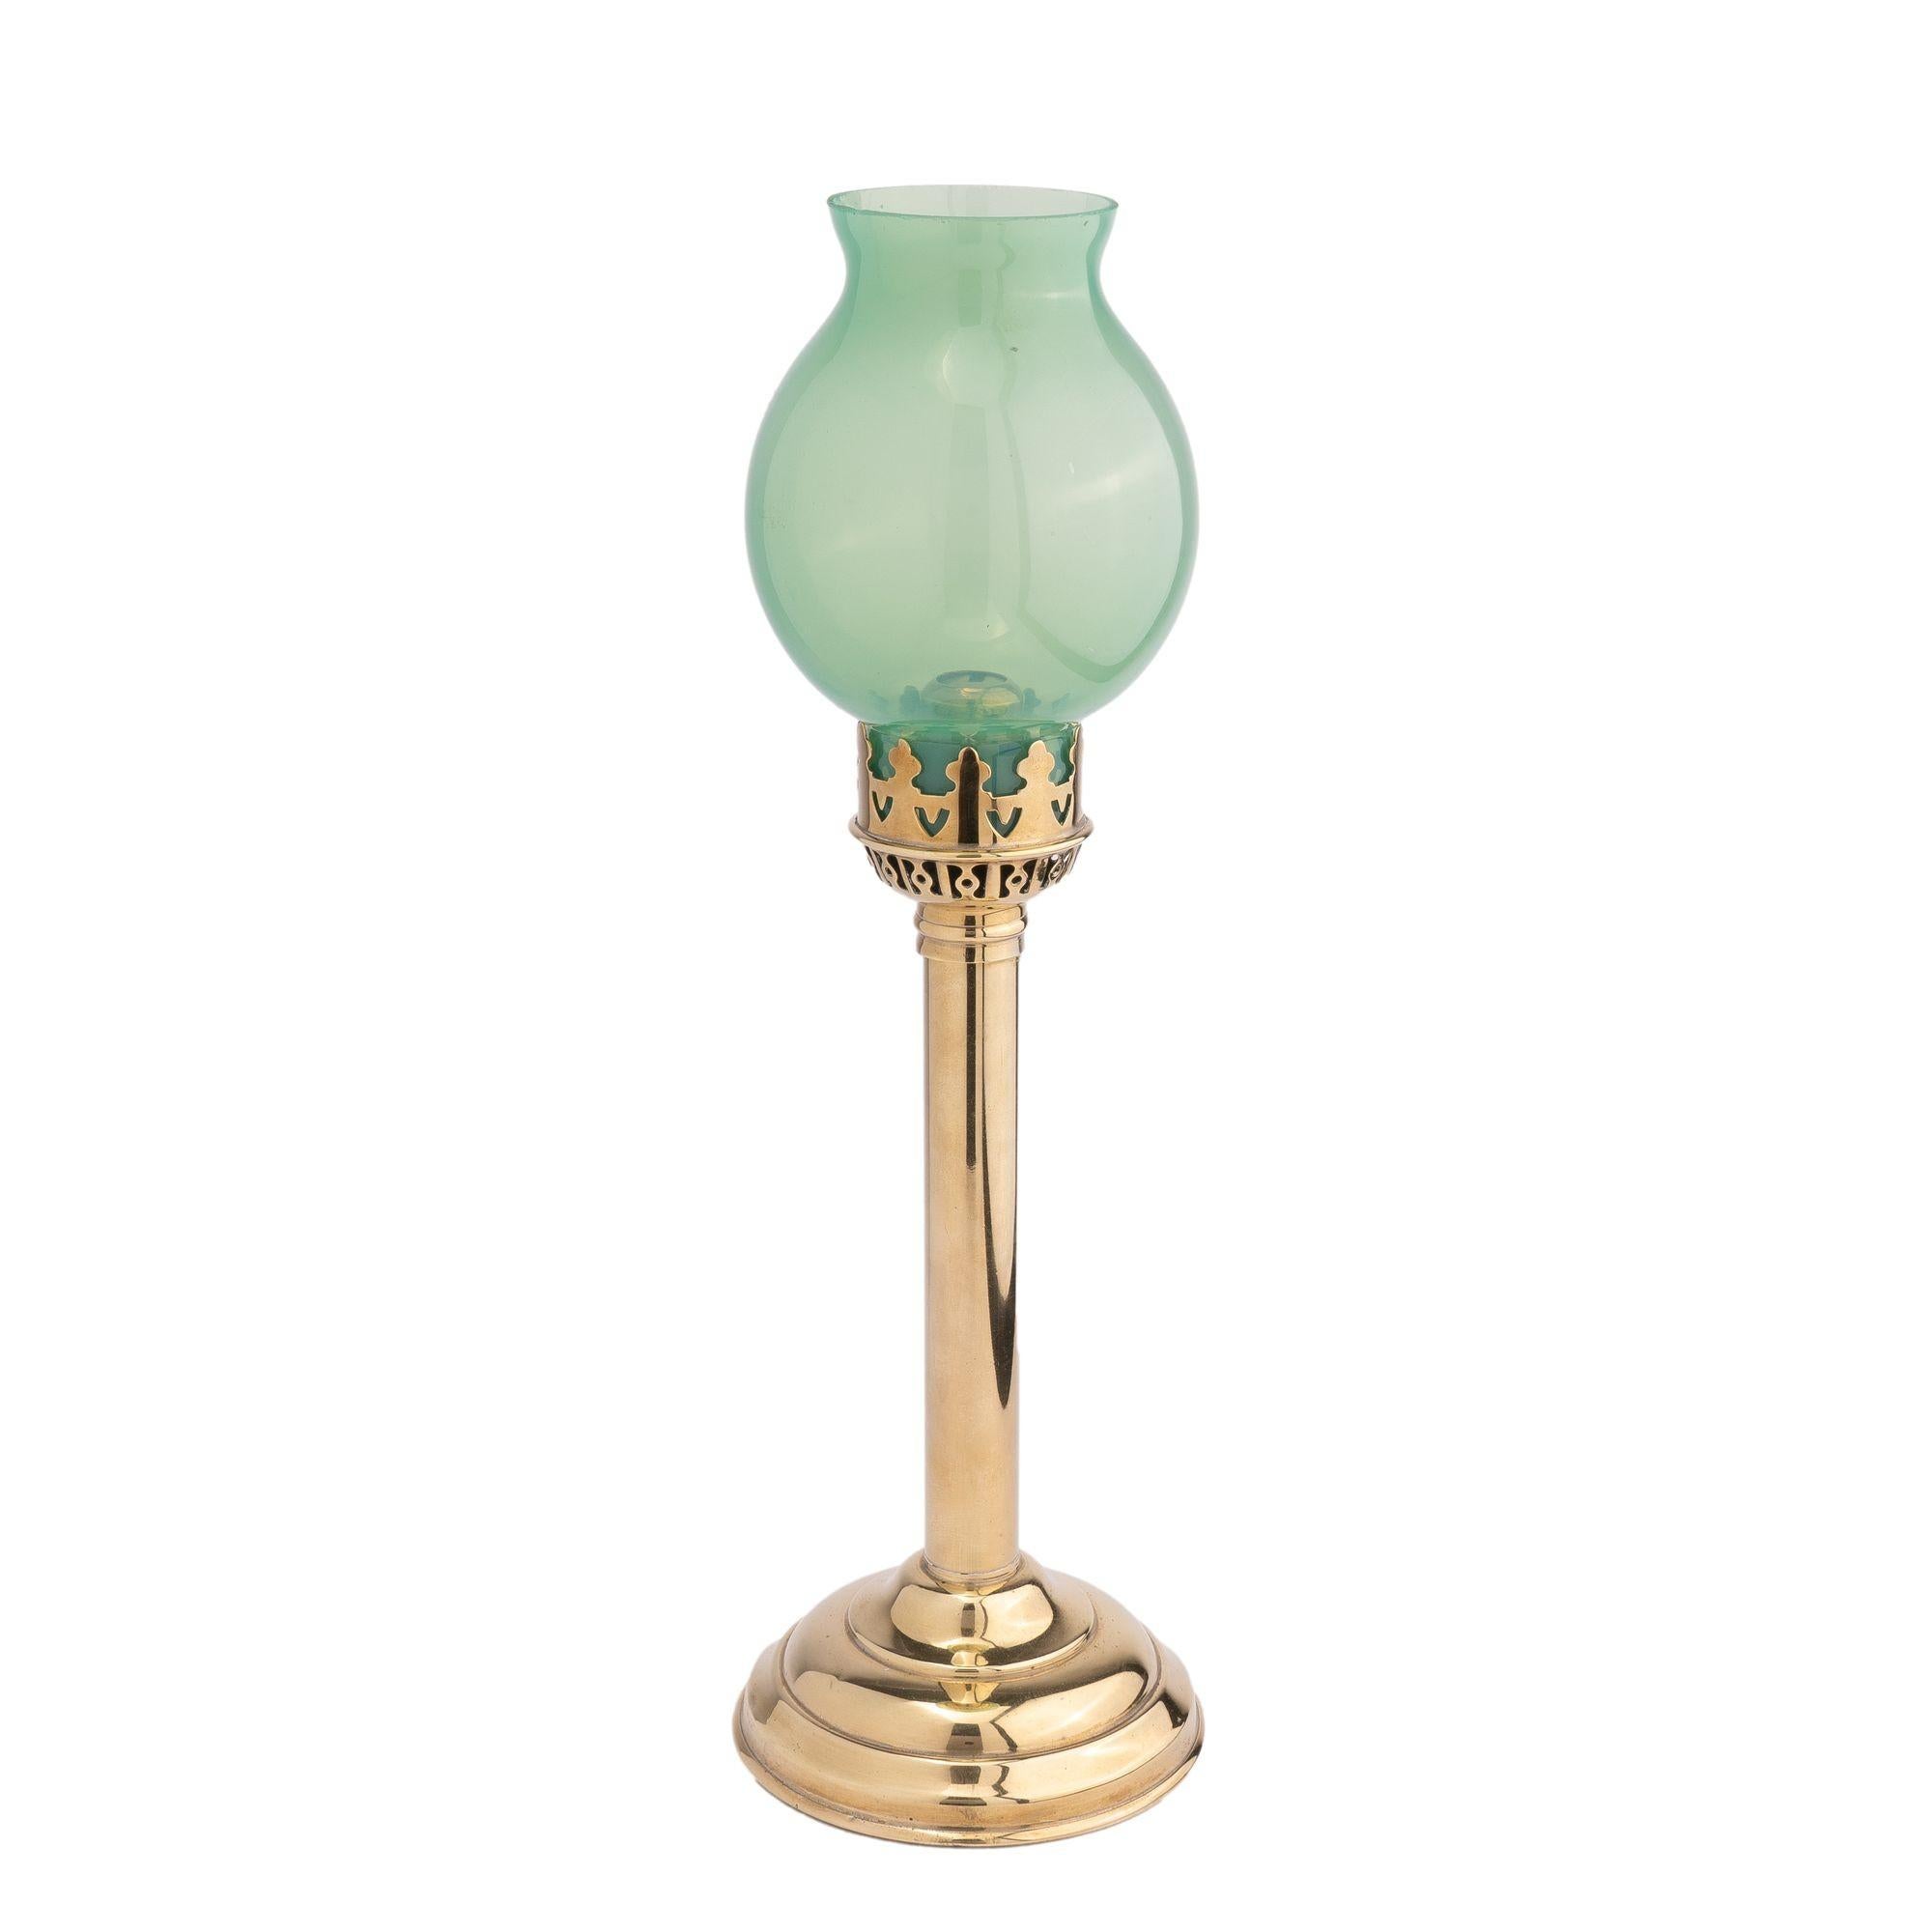 Spring loaded cylinder shaft candlestick in stamped brass on a weighted circular domed base. The candlestick top has a reticulated brass shade gallery fitted with a translucent green opaline blown glass bubble shade.
France, 1875-1900.